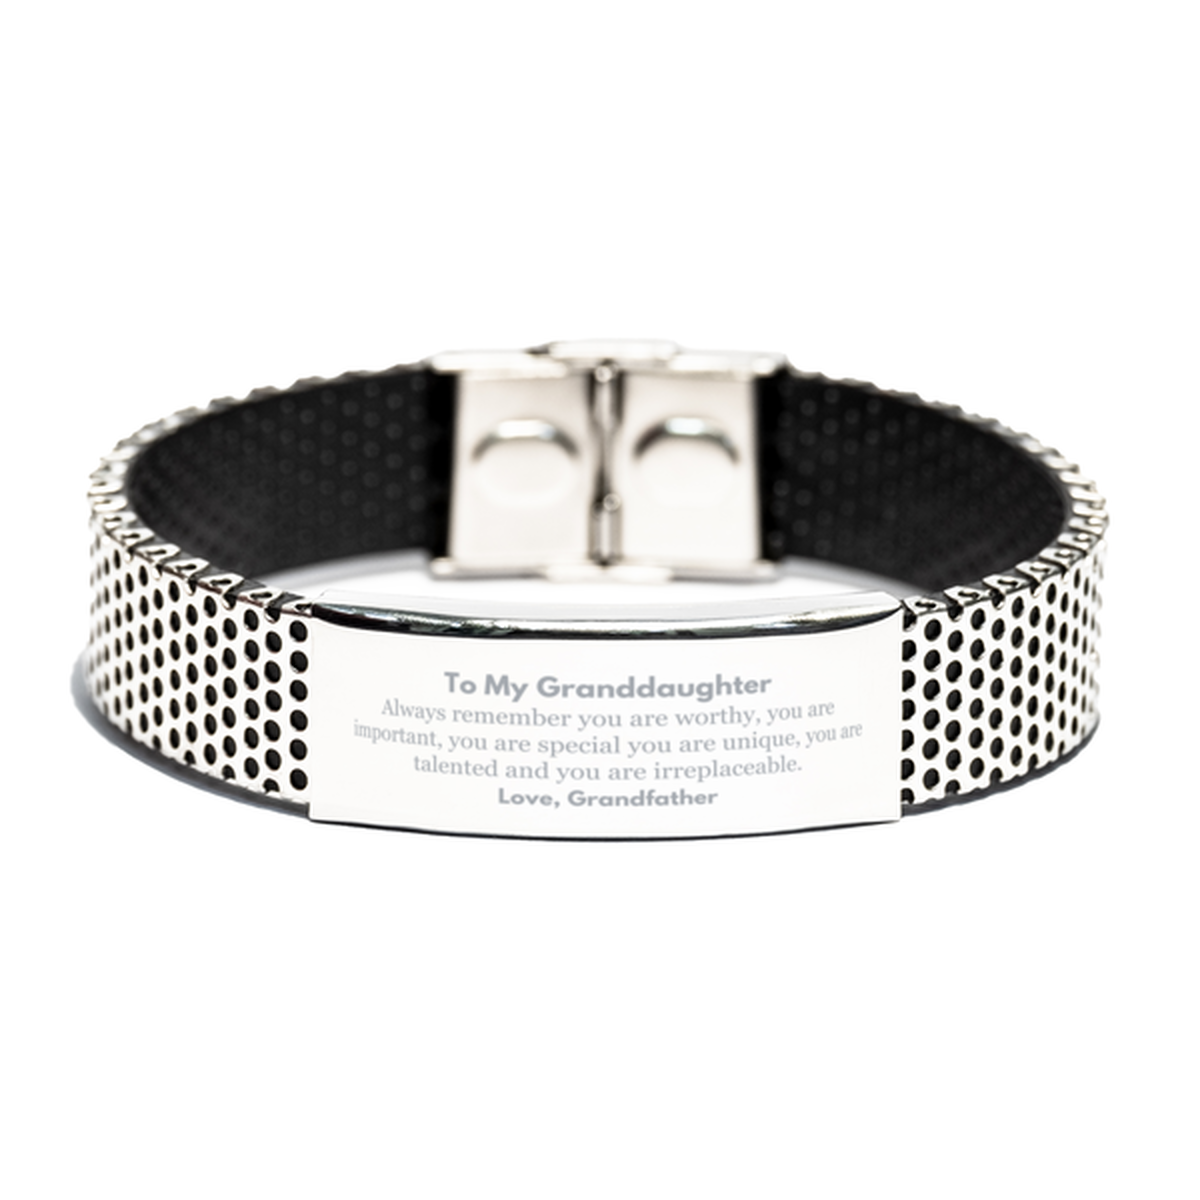 Granddaughter Birthday Gifts from Grandfather, Inspirational Stainless Steel Bracelet for Granddaughter Christmas Graduation Gifts for Granddaughter Always remember you are worthy, you are important. Love, Grandfather